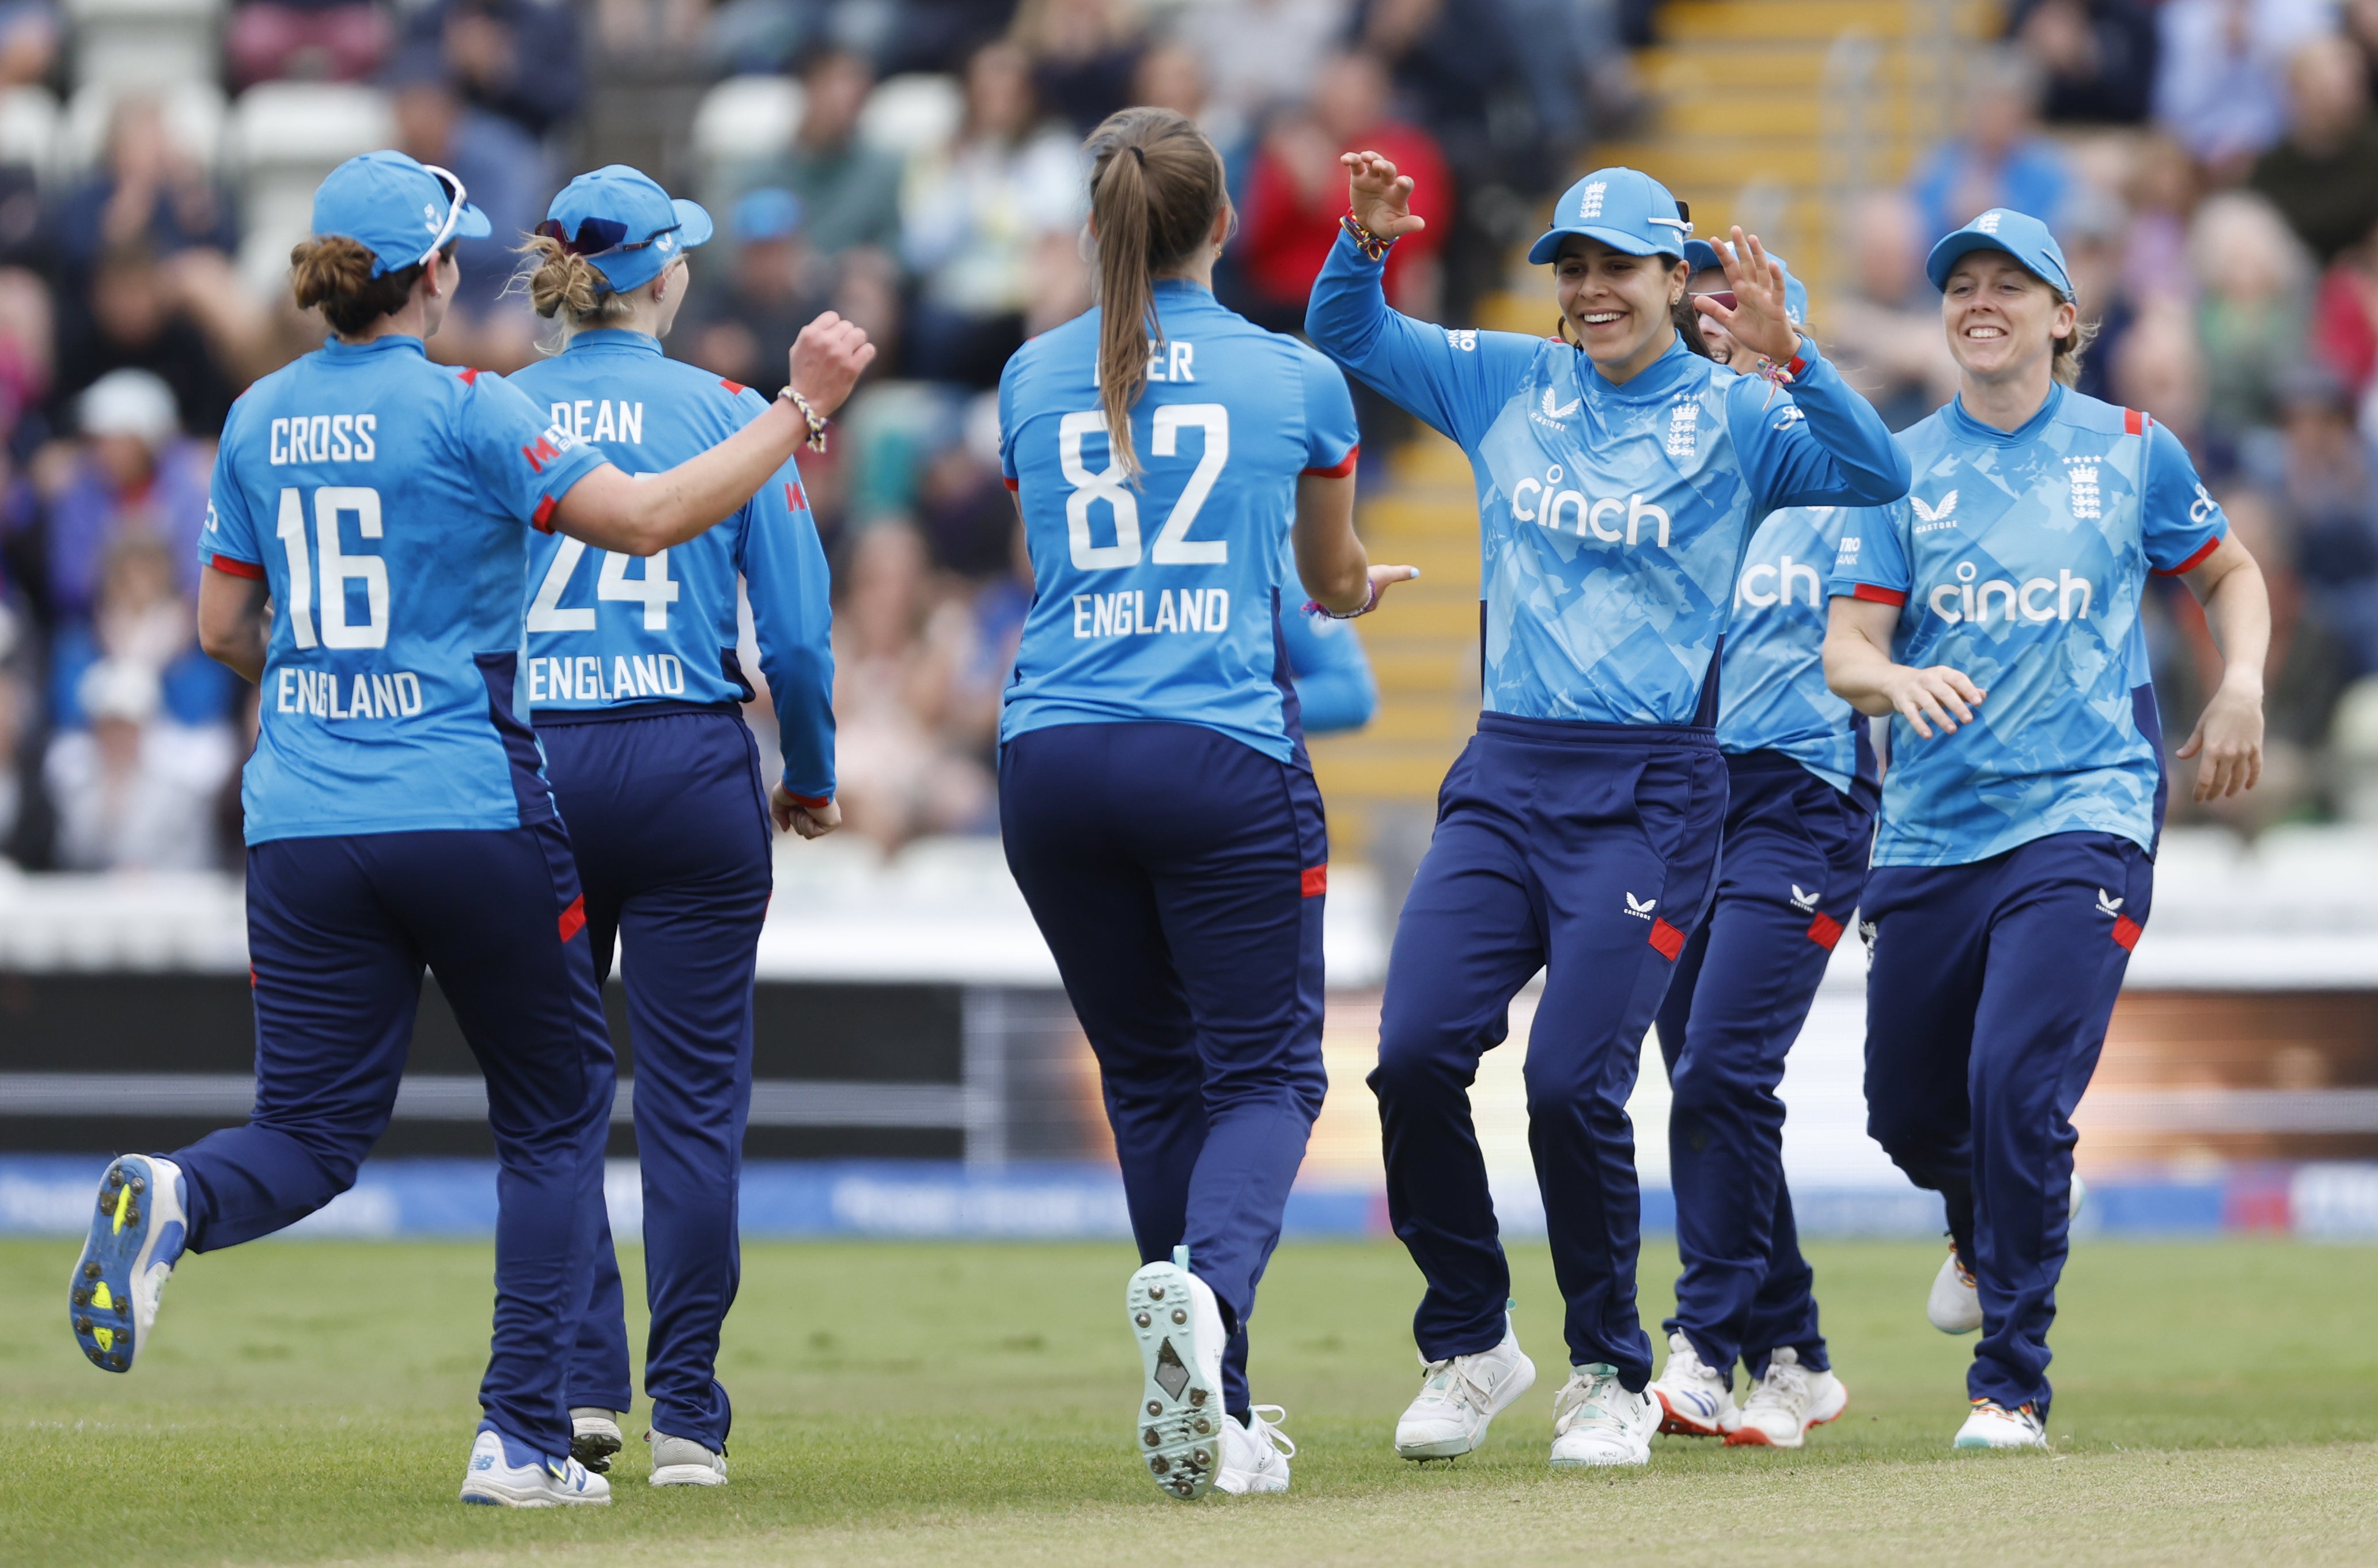 England bowler Lauren Filer celebrates the wicket of New Zealand’s Suzie Bates with teammates (Nigel French/PA)